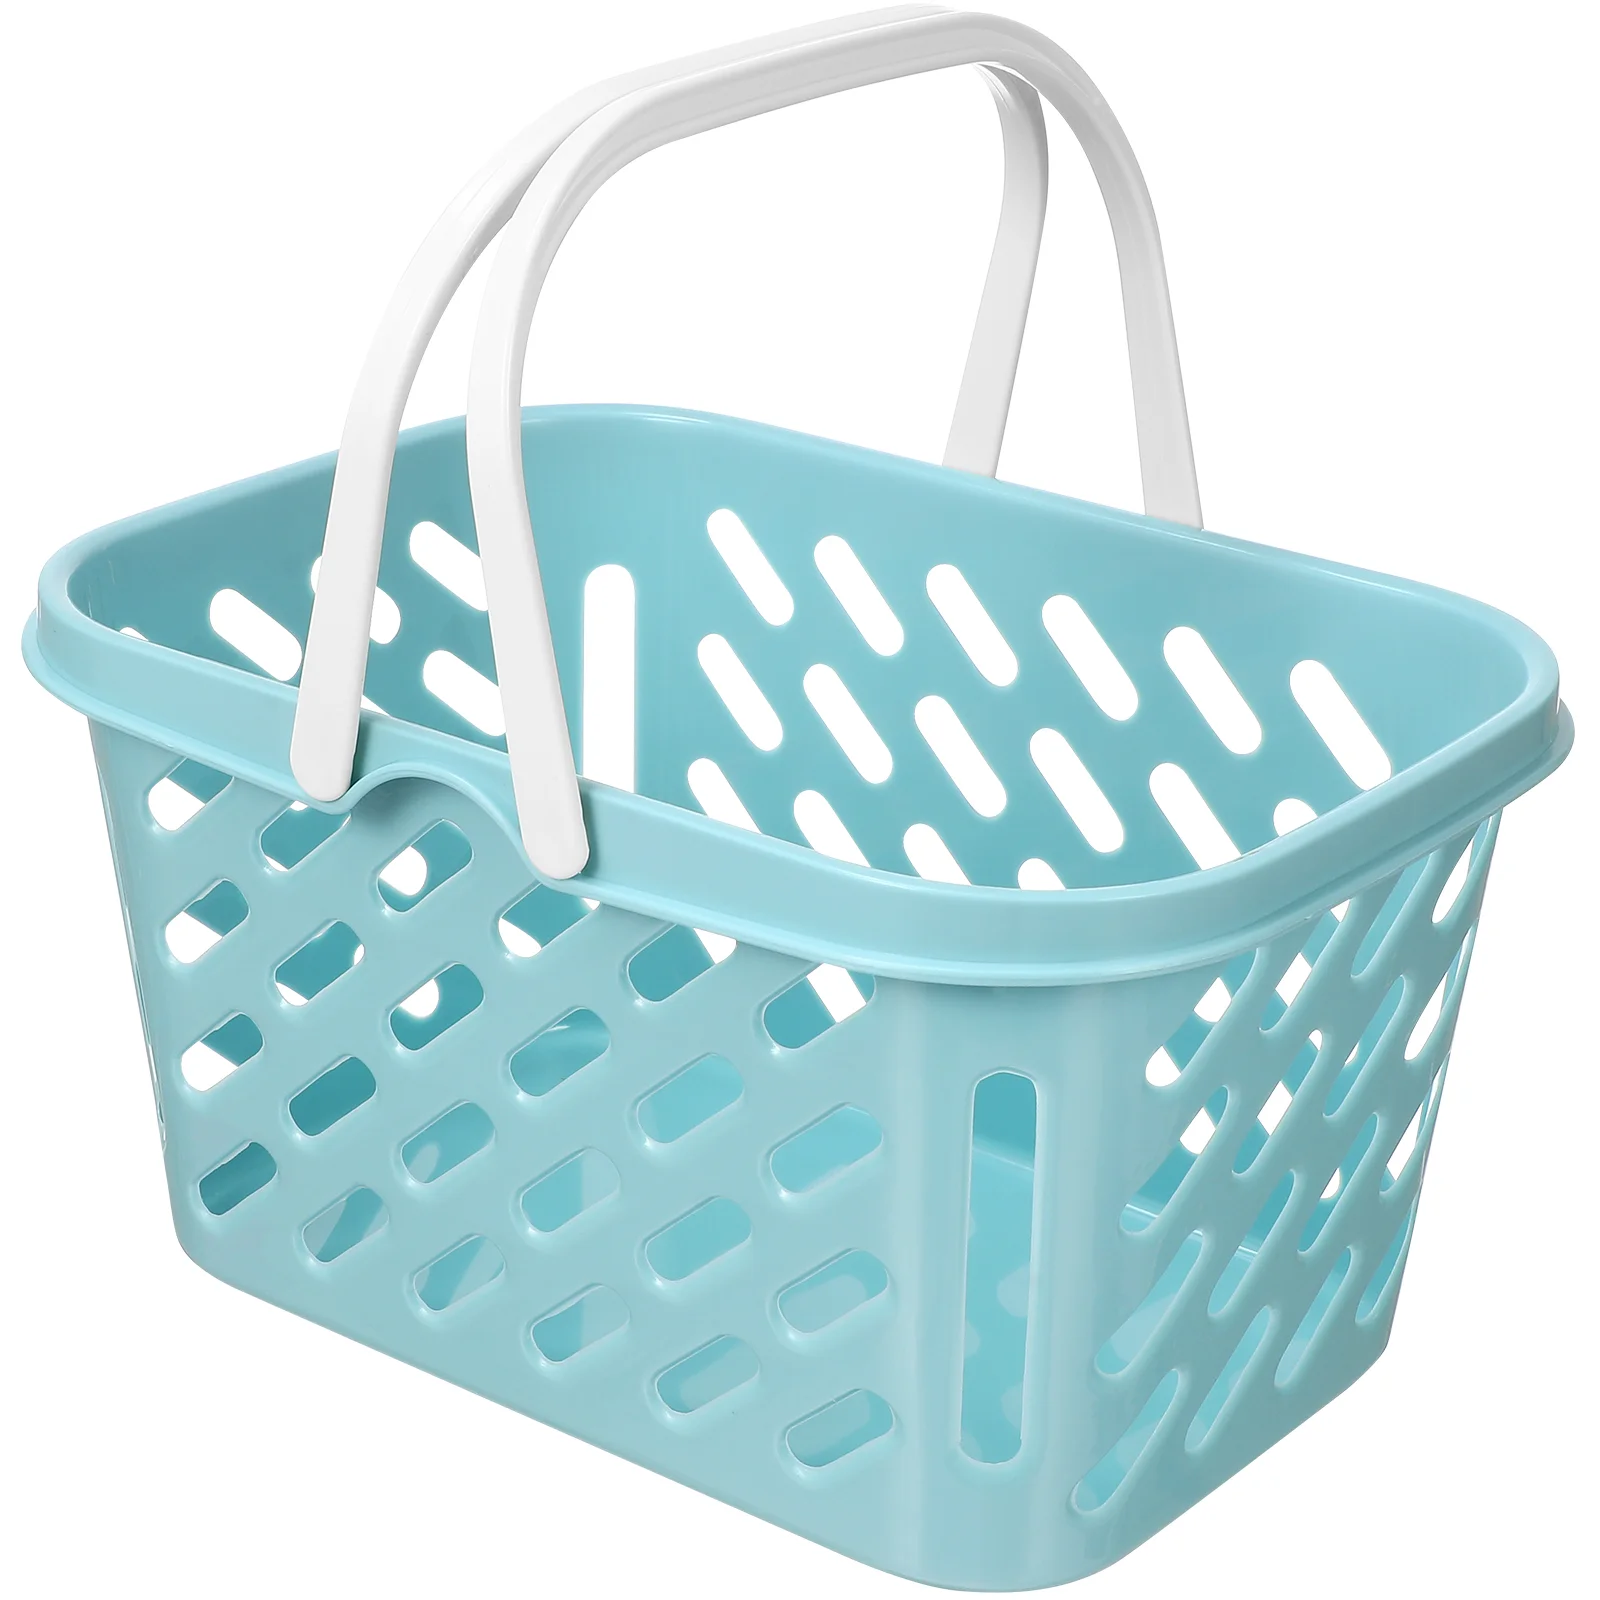 

Basket Shopping Grocery Kids Toy Baskets Play Mini Storage Handle Cart Pretend Kitchen Container Store Handles Easter Bin Toys